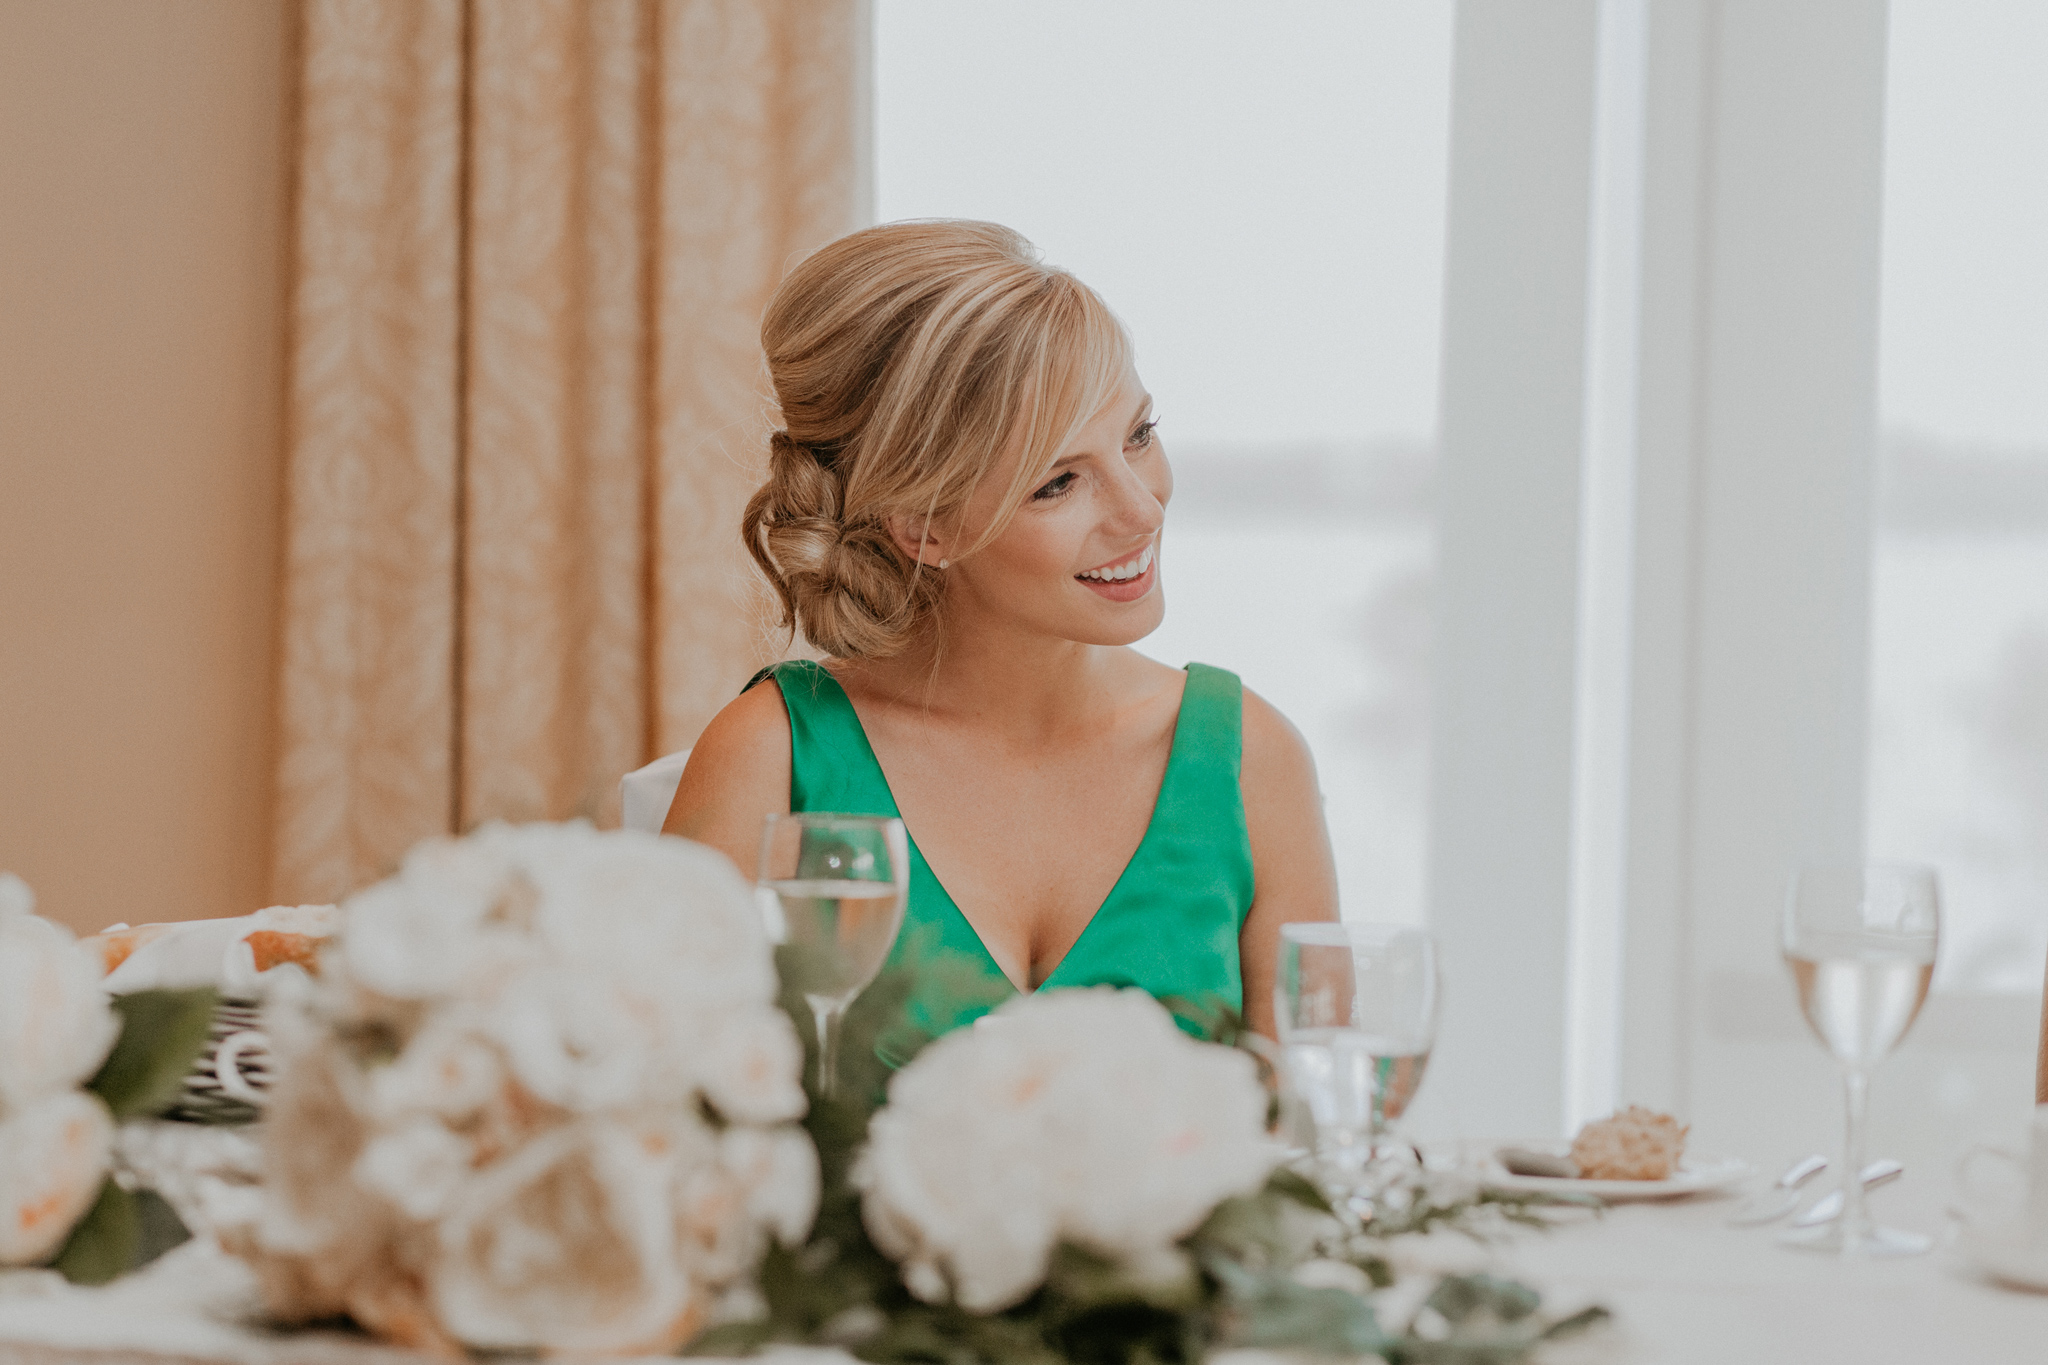 Maid of honor smiles at head table in wedding reception